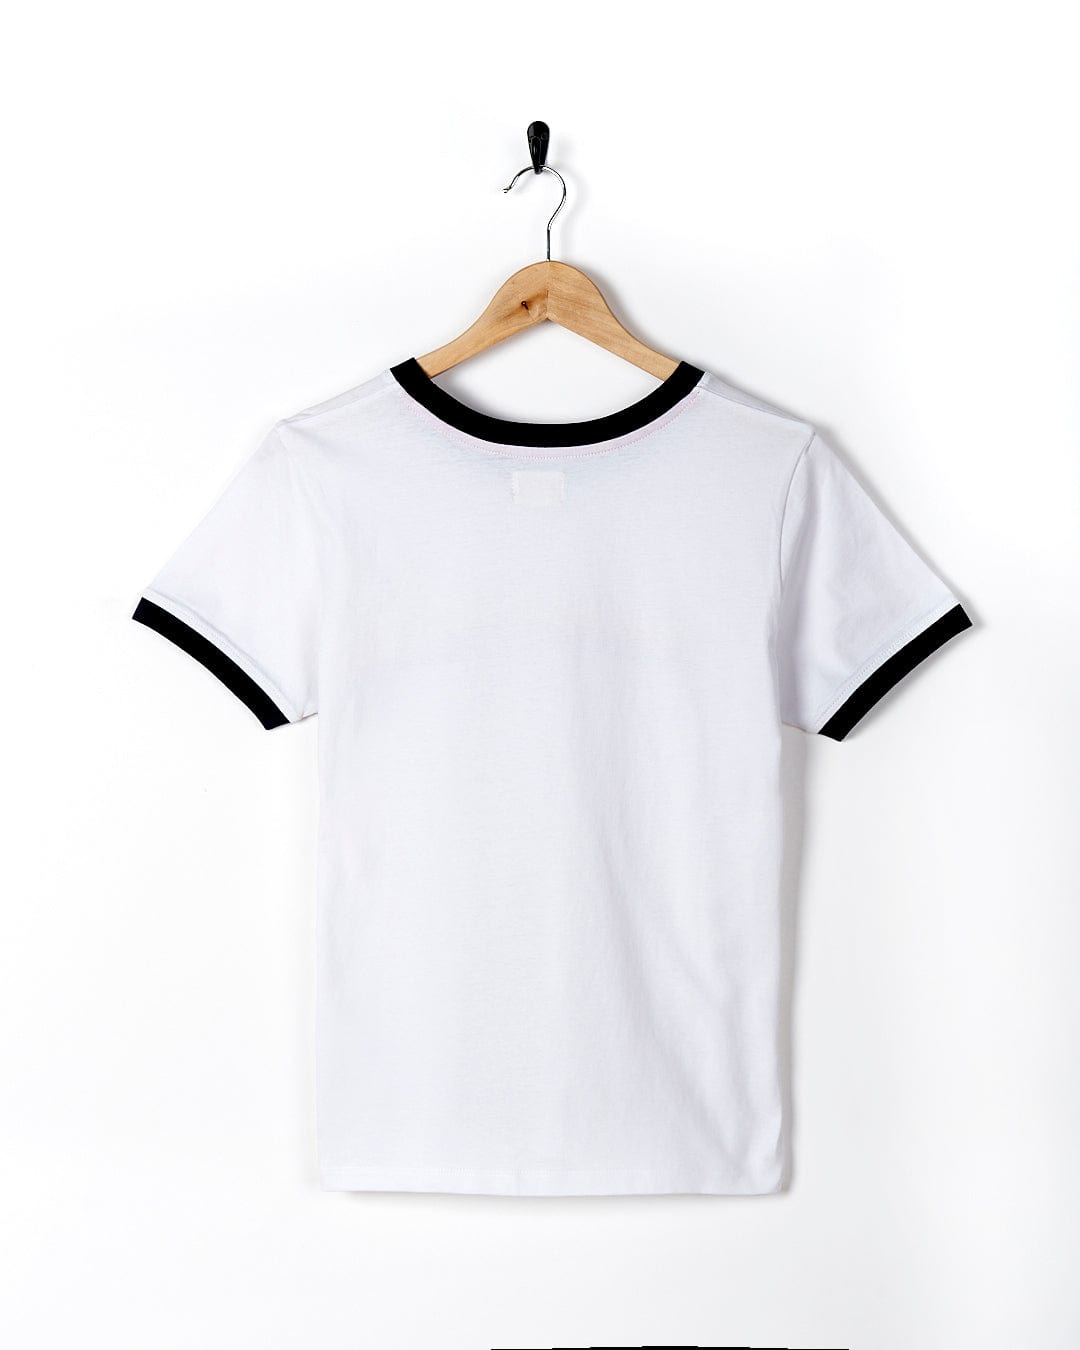 A Celeste Stripe - Womens Ringer Tee - White with black trim, perfect for showcasing your #SaltrockSoul, hanging neatly on a hanger.